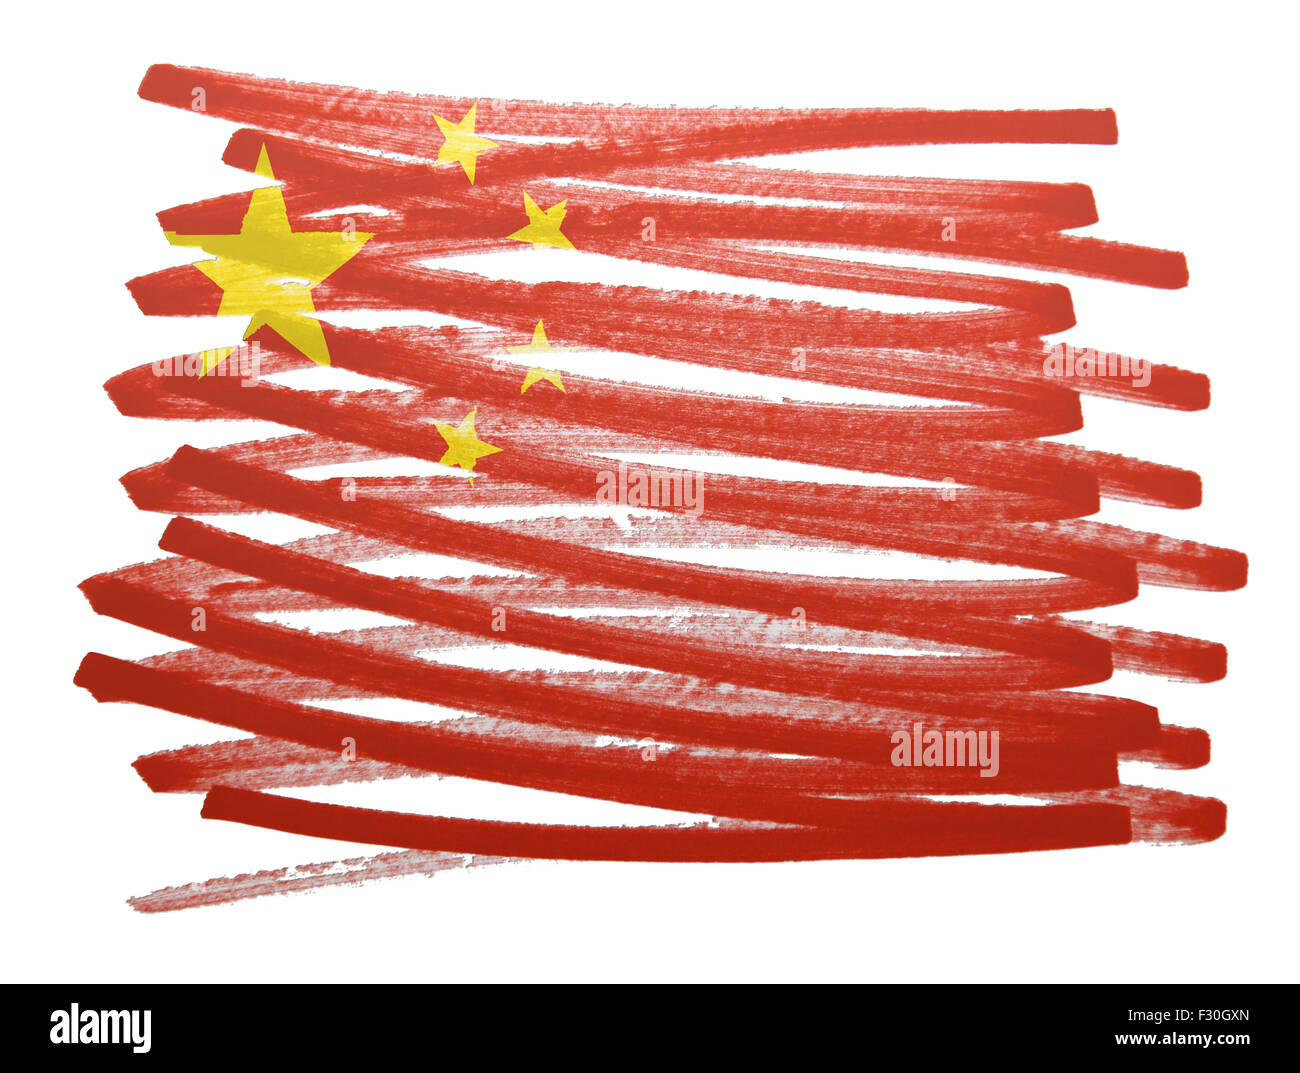 Flag illustration made with pen - China Stock Photo